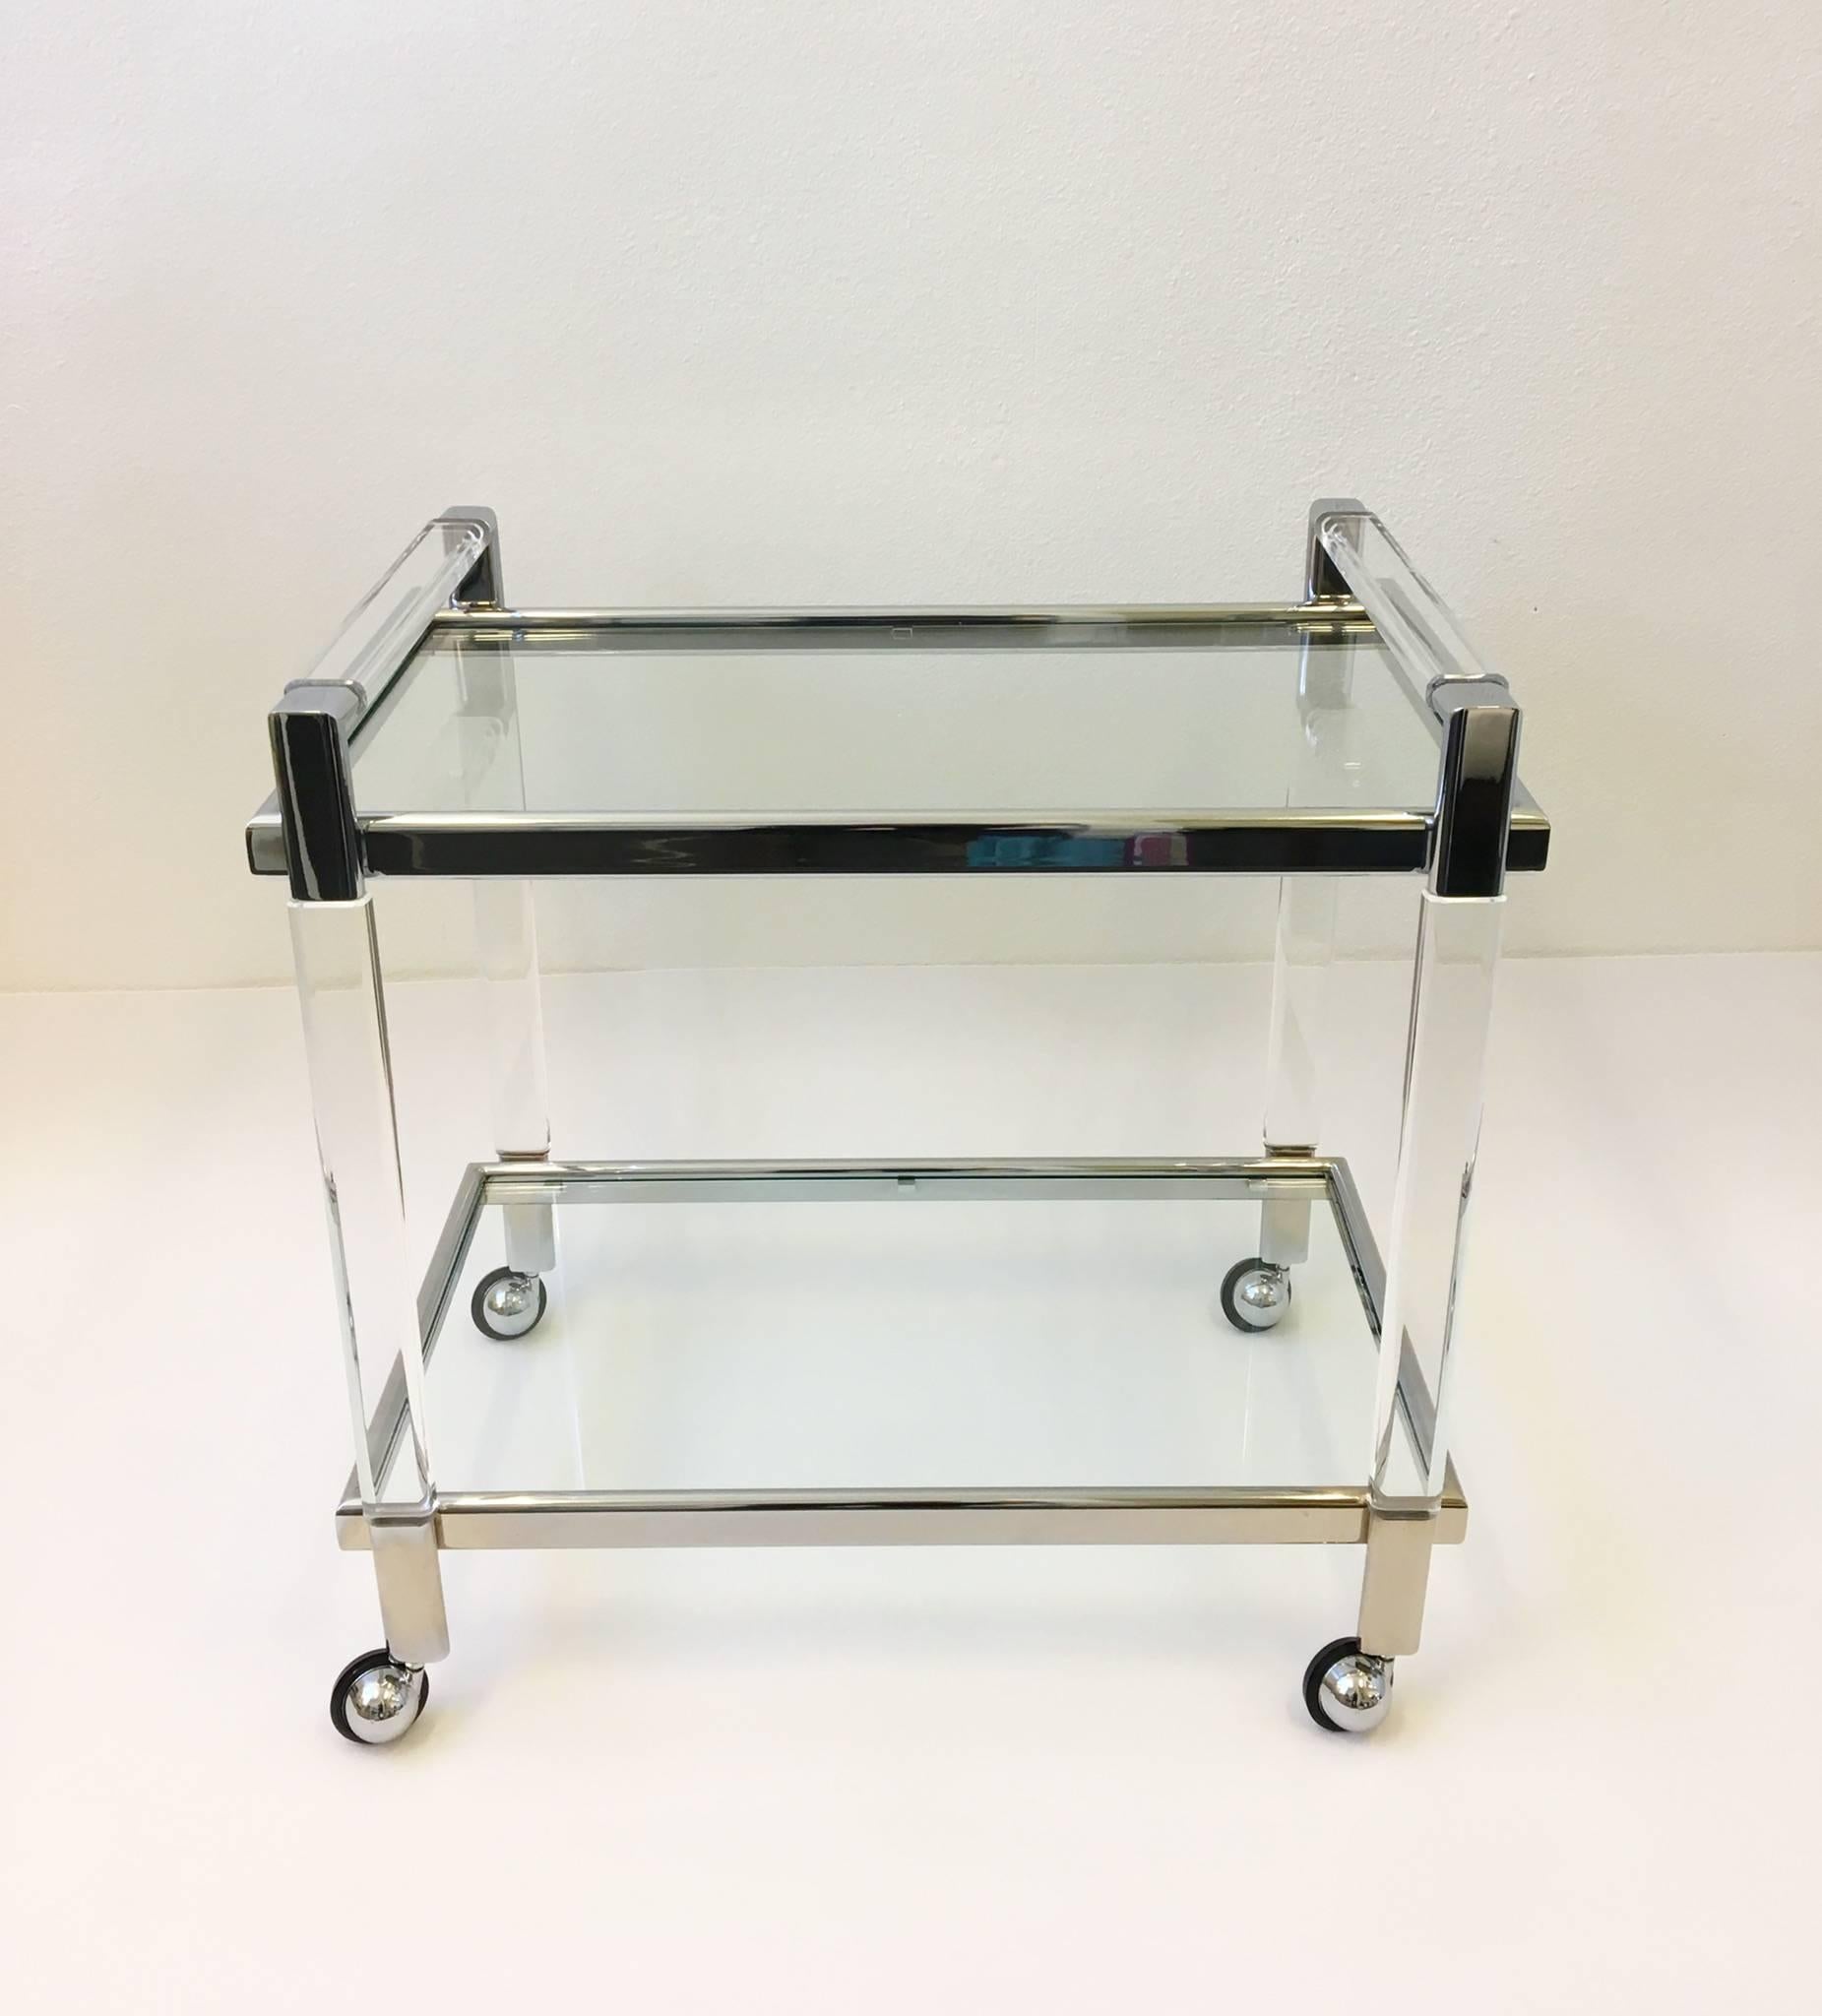 A glamorous acrylic and chrome with glass inserts bar cart design by Charles Hollis Jones in the 1970s. It's signed by Charles Hollis Jones and we replaced the glass inserts. 

Dimensions: 32